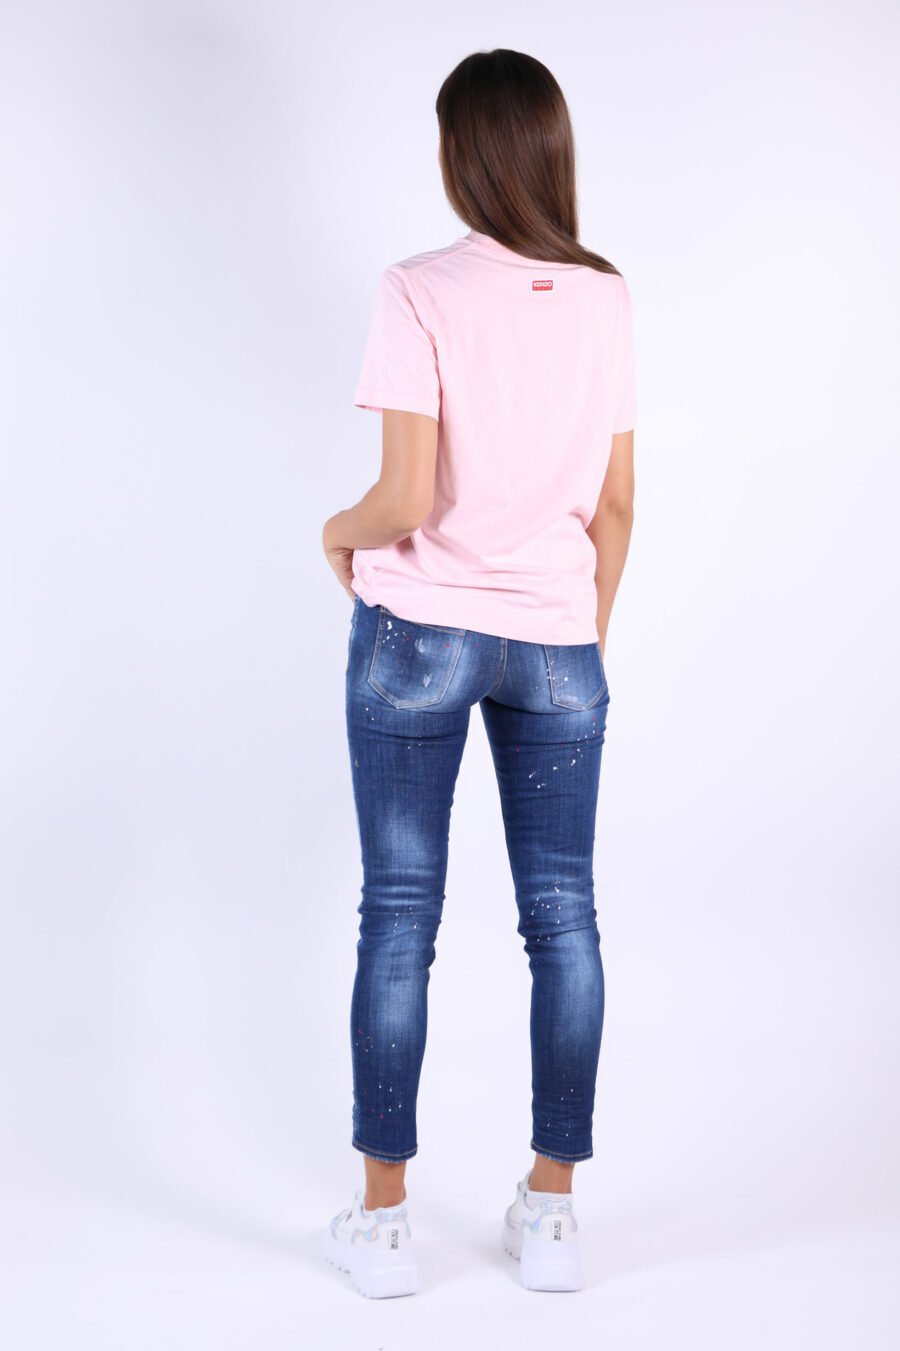 Jeans "Jennifer Jean" blue with splash paint and faded effect - 361223054662201900